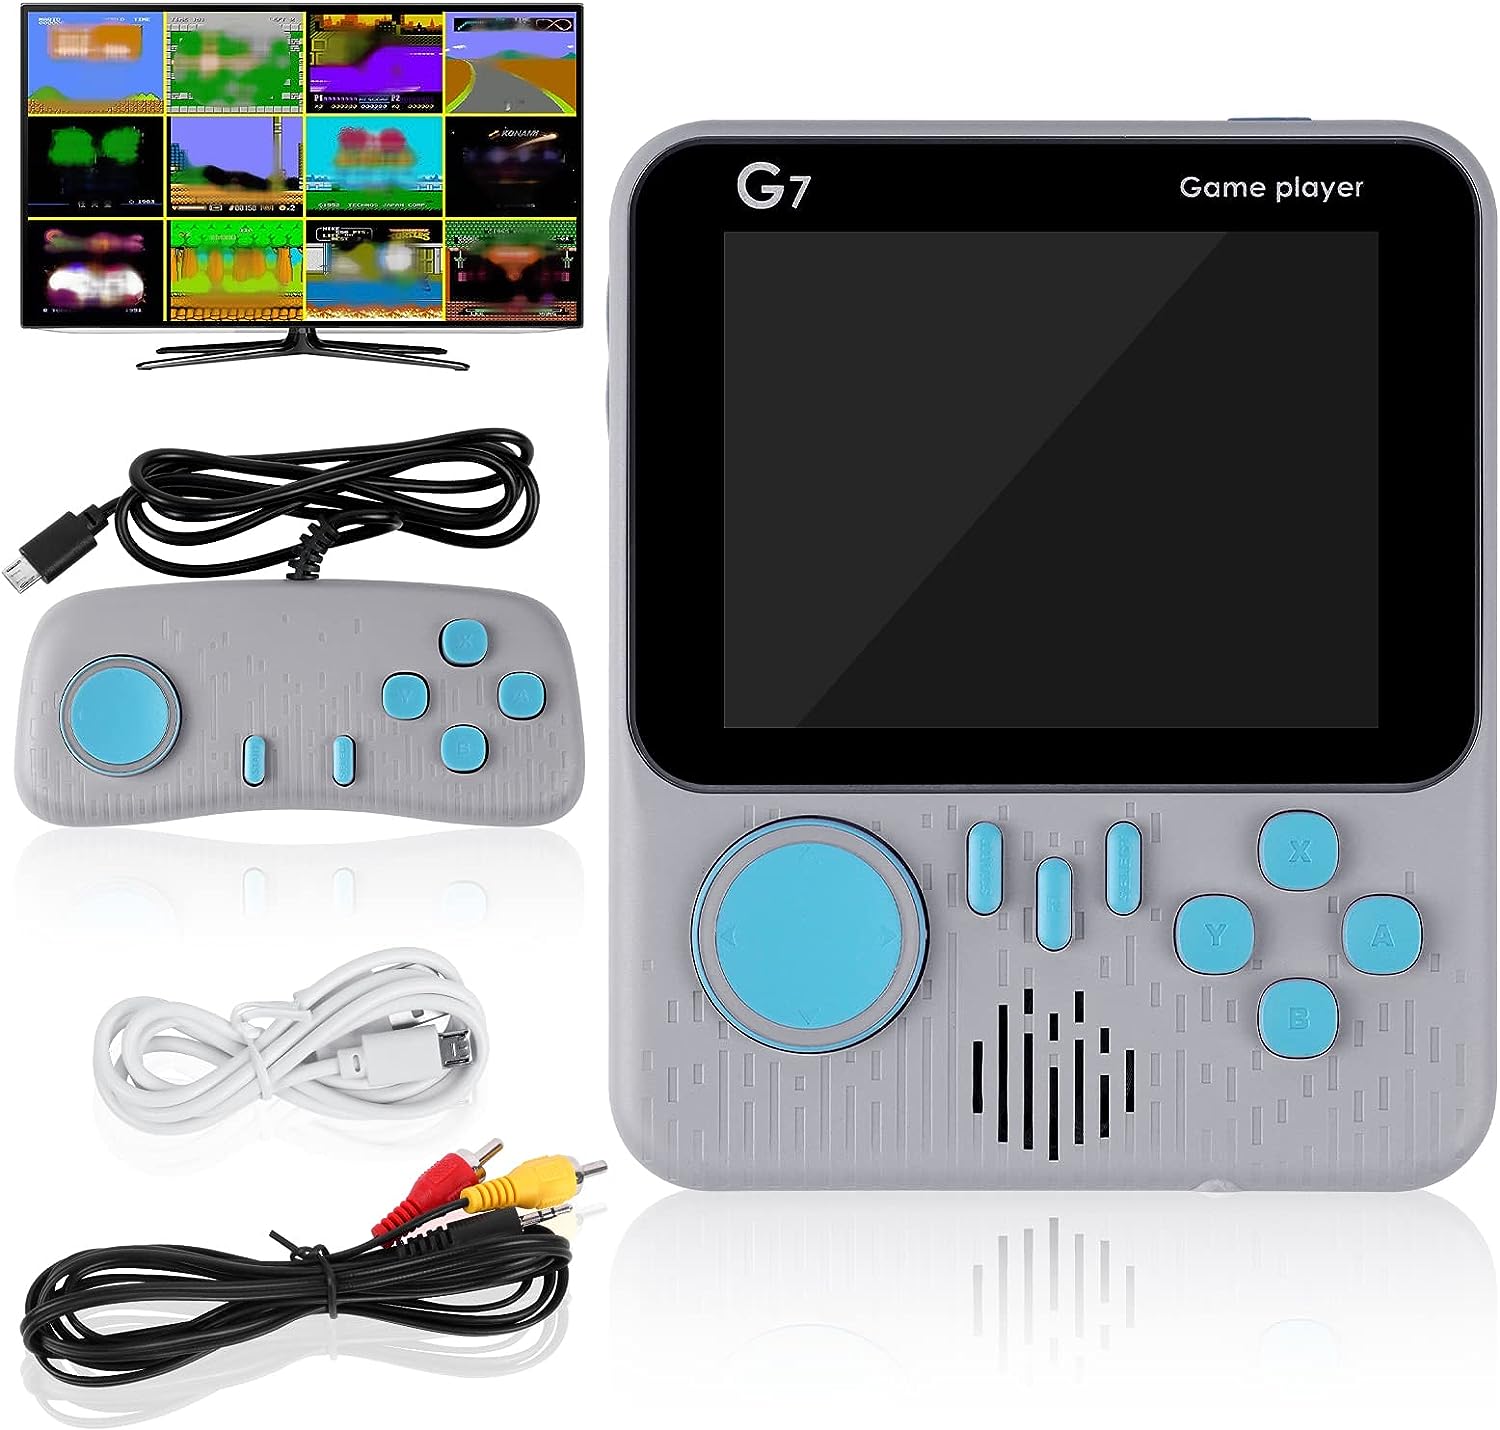 OSDUE Handheld Game Console Review